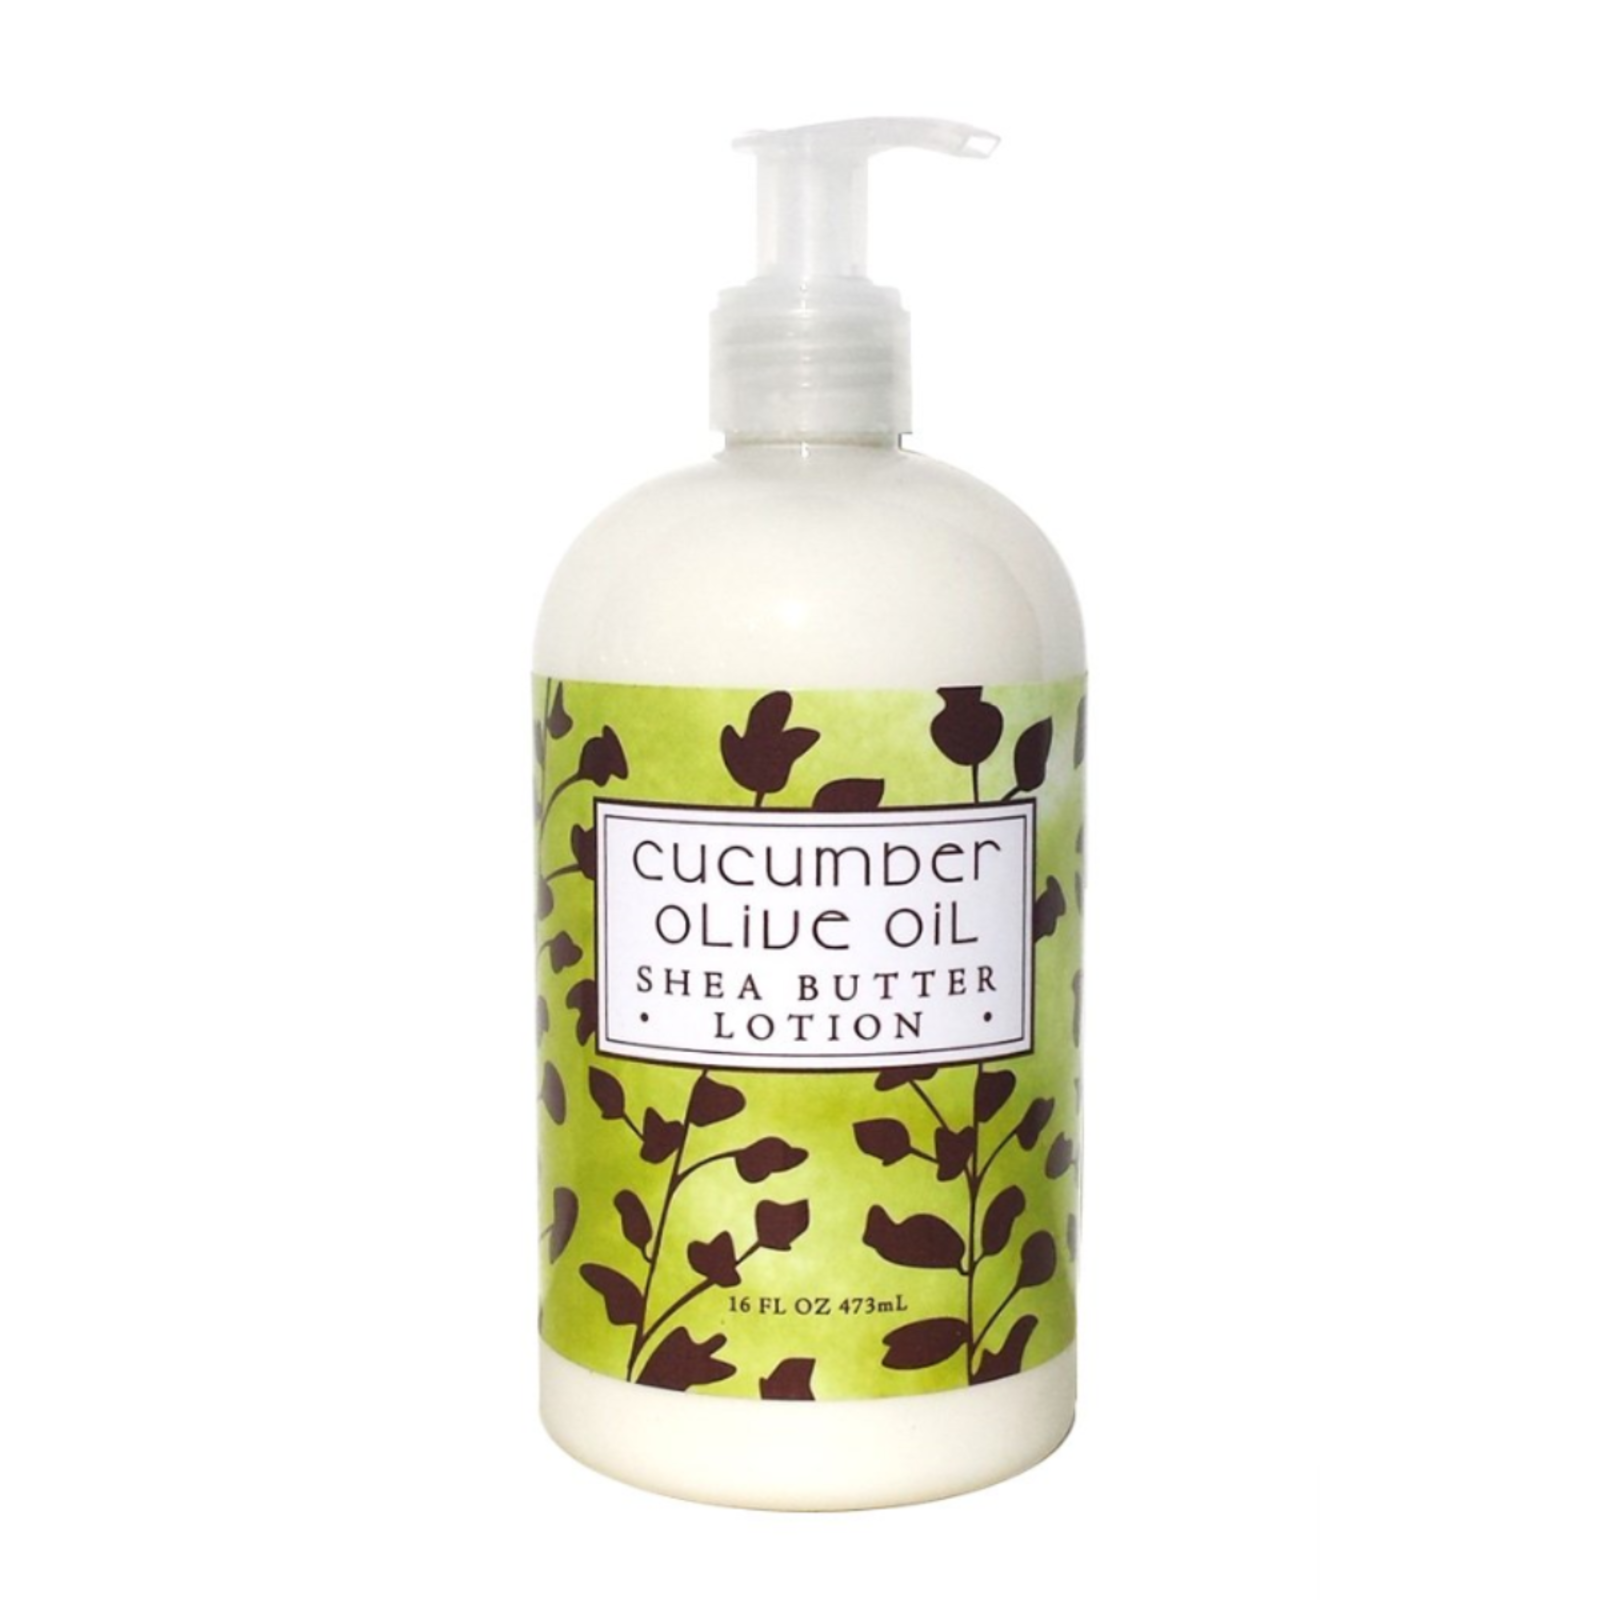 Greenwich Bay Trading Company Cucumber Olive Oil Hand Lotion loading=